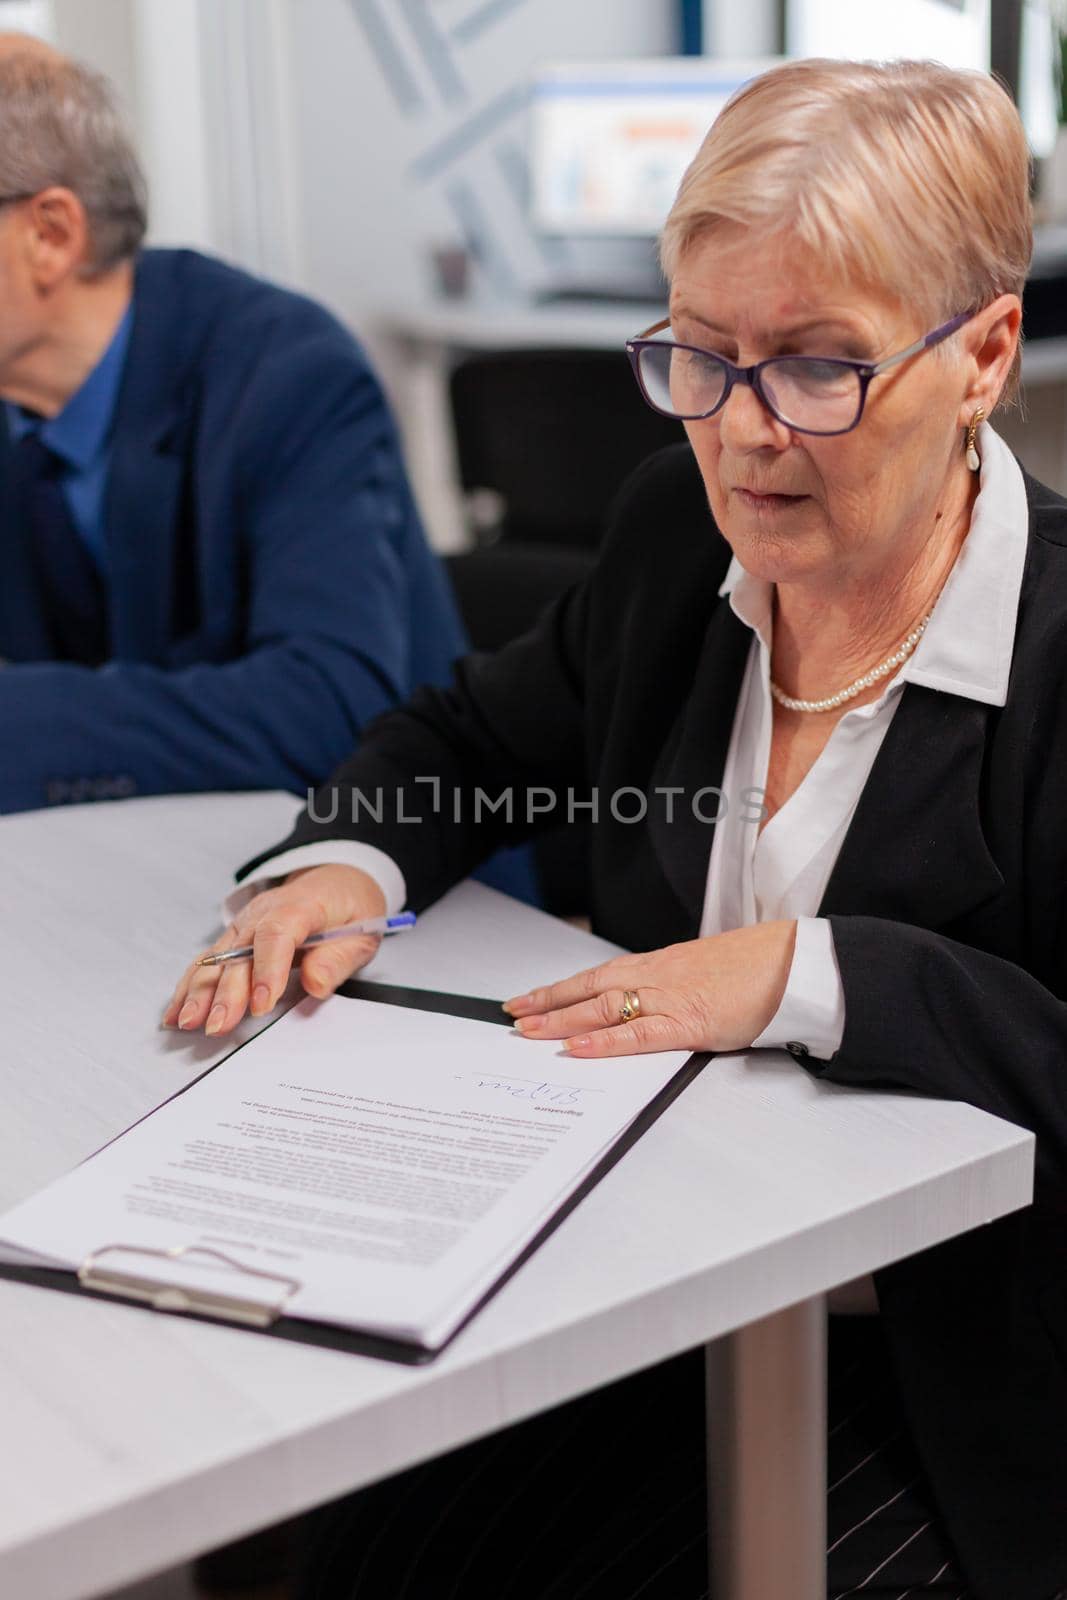 Woman reading financial documents in conference room by DCStudio